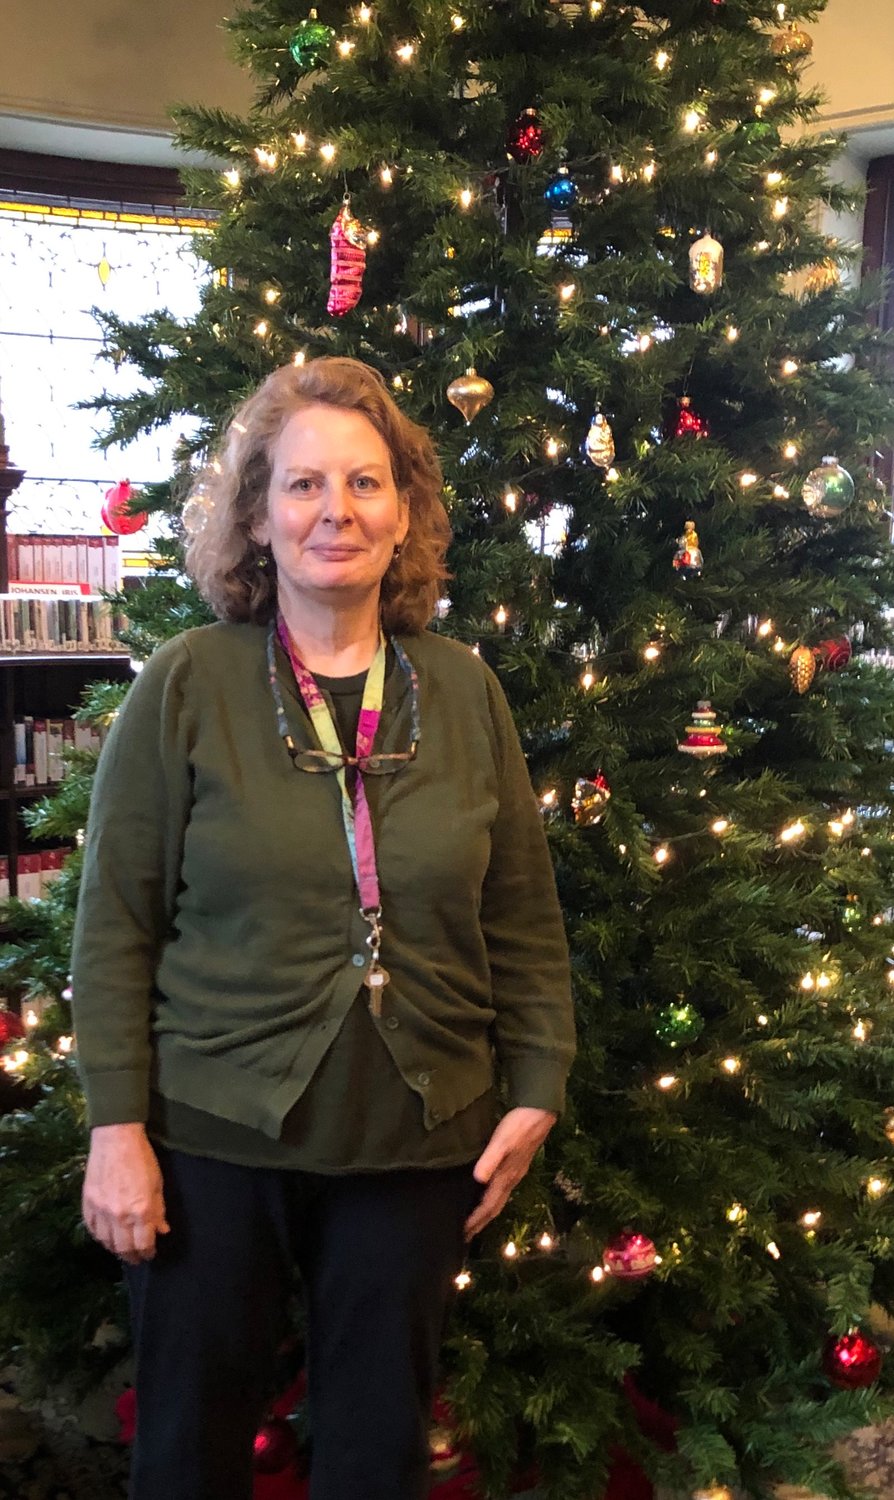 Chris Matos has taken over as the new Director of the George Hail Free Library. She has 23 years of experience working in libraries and was most recently assistant director of the Mattapoisett Free Library in Massachusetts.